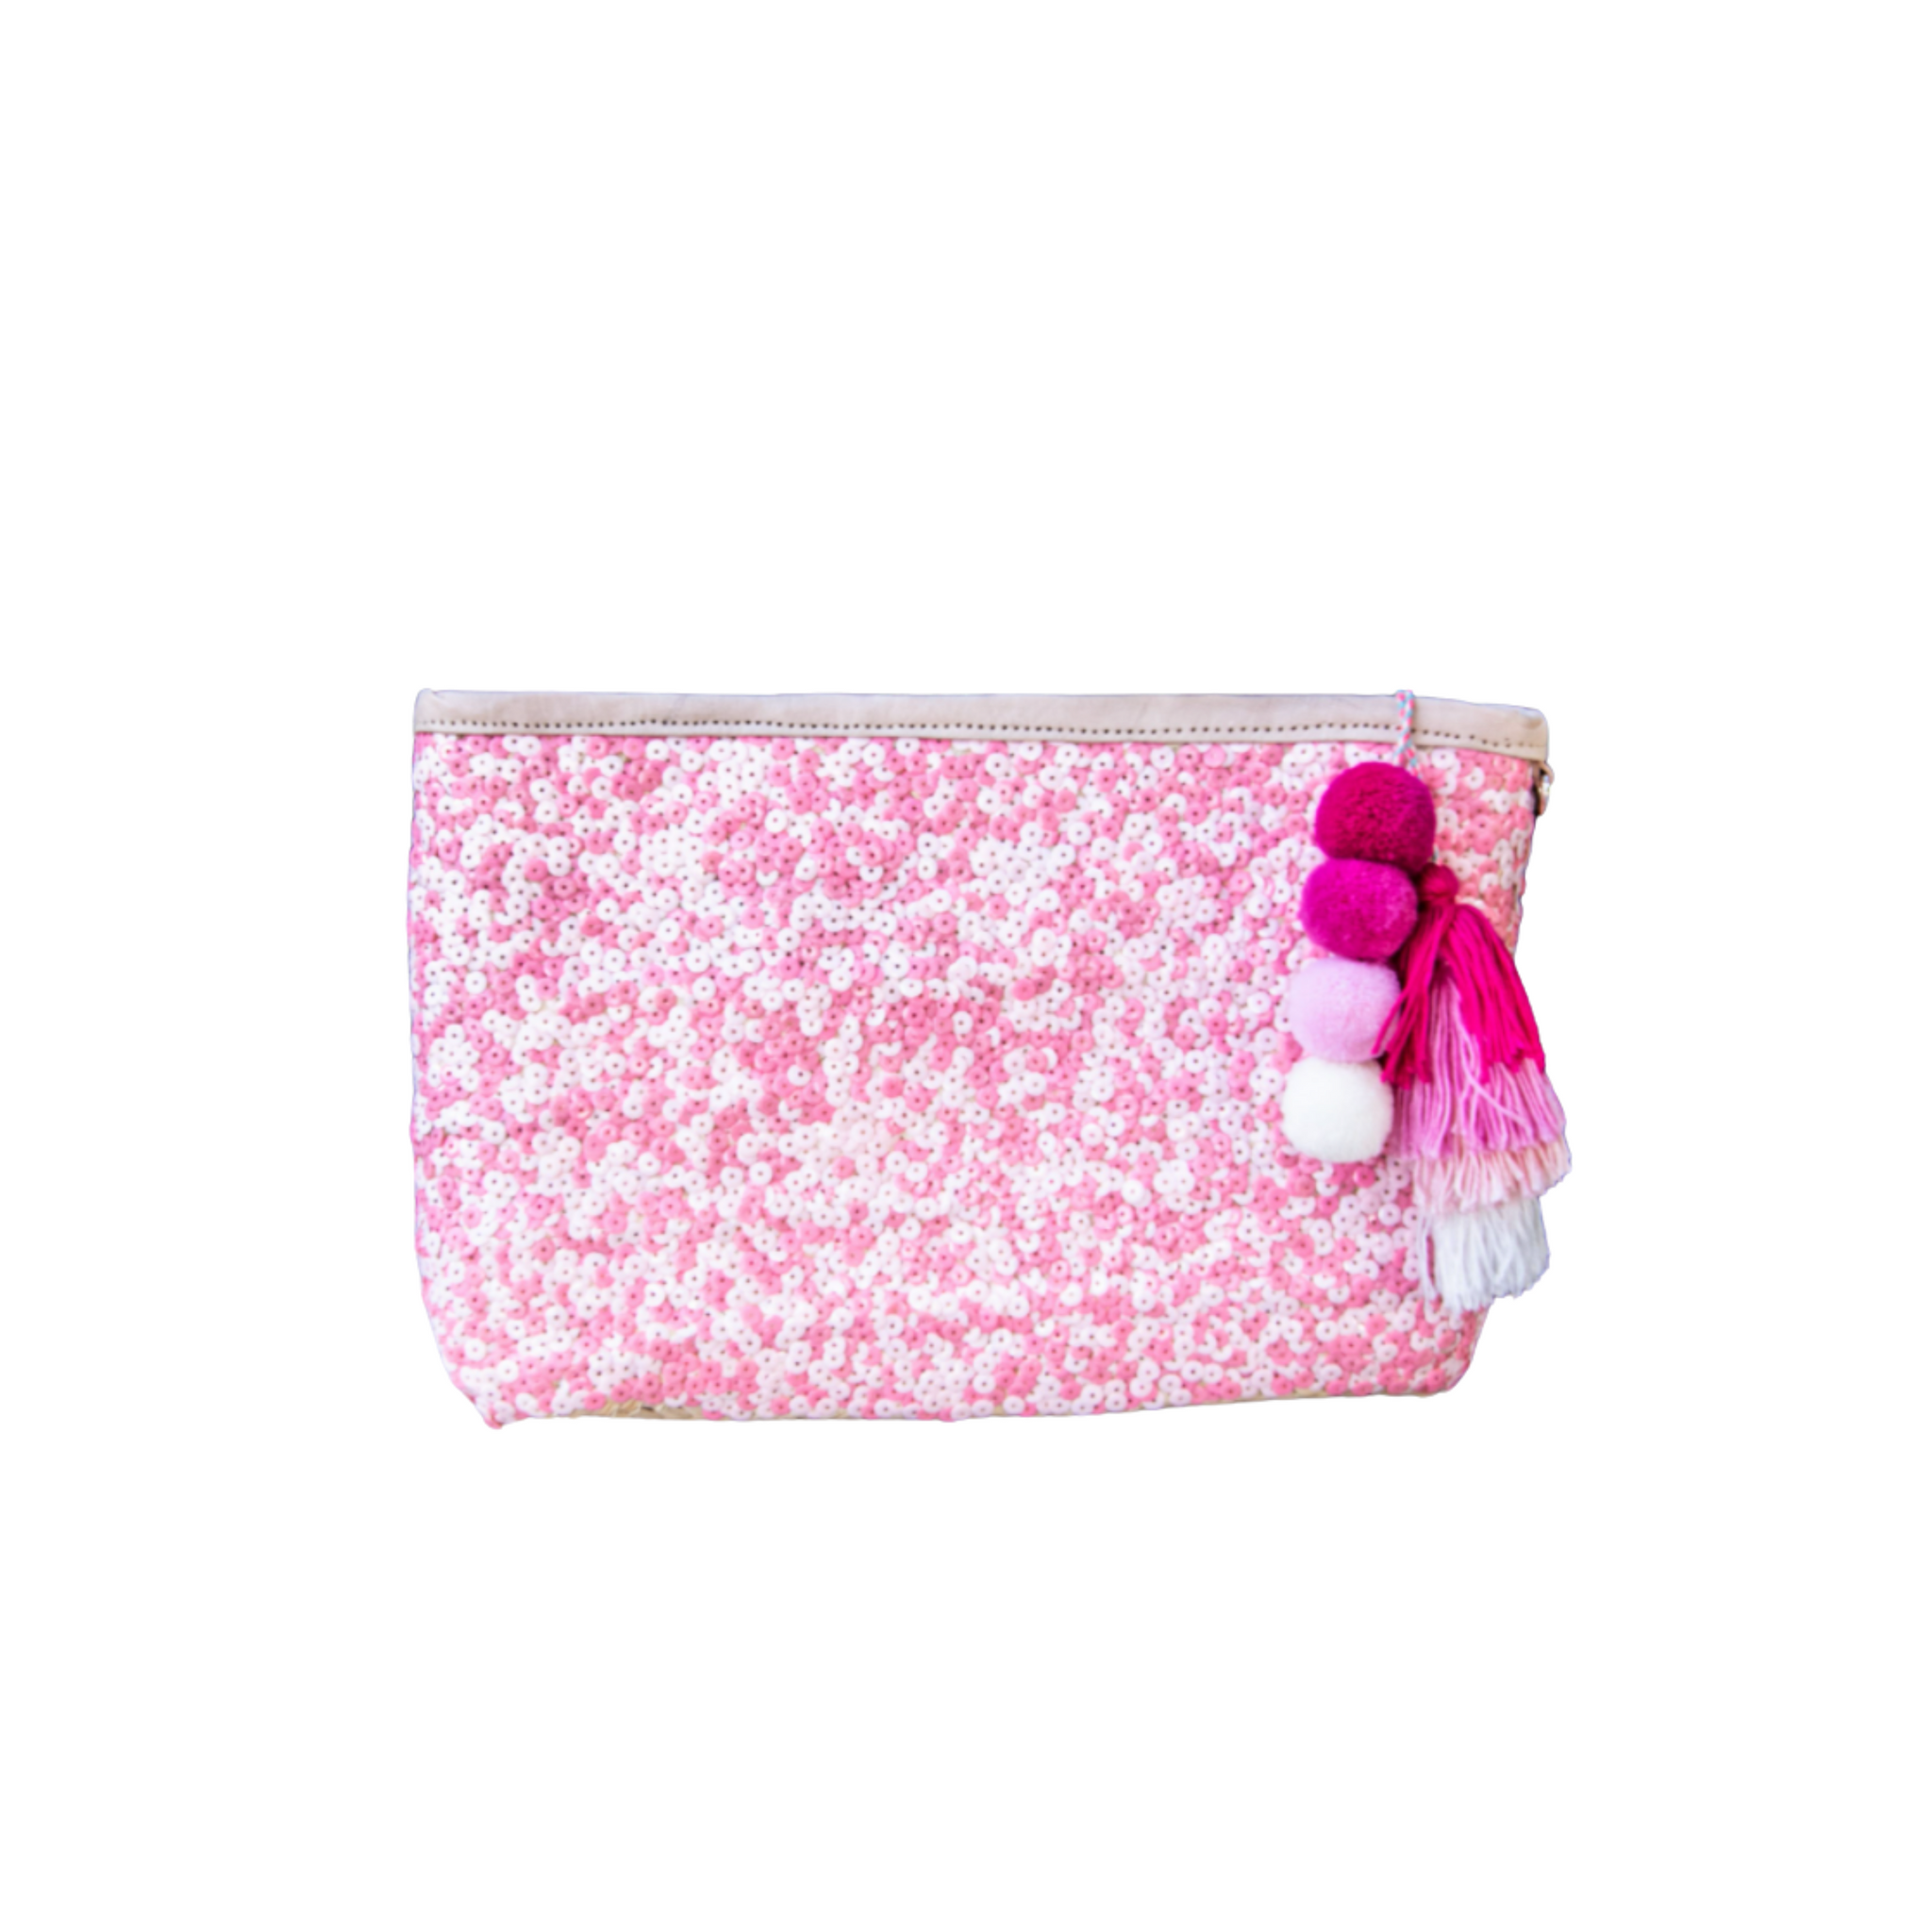 Straw clutch with pink sequins and tassel pom pom